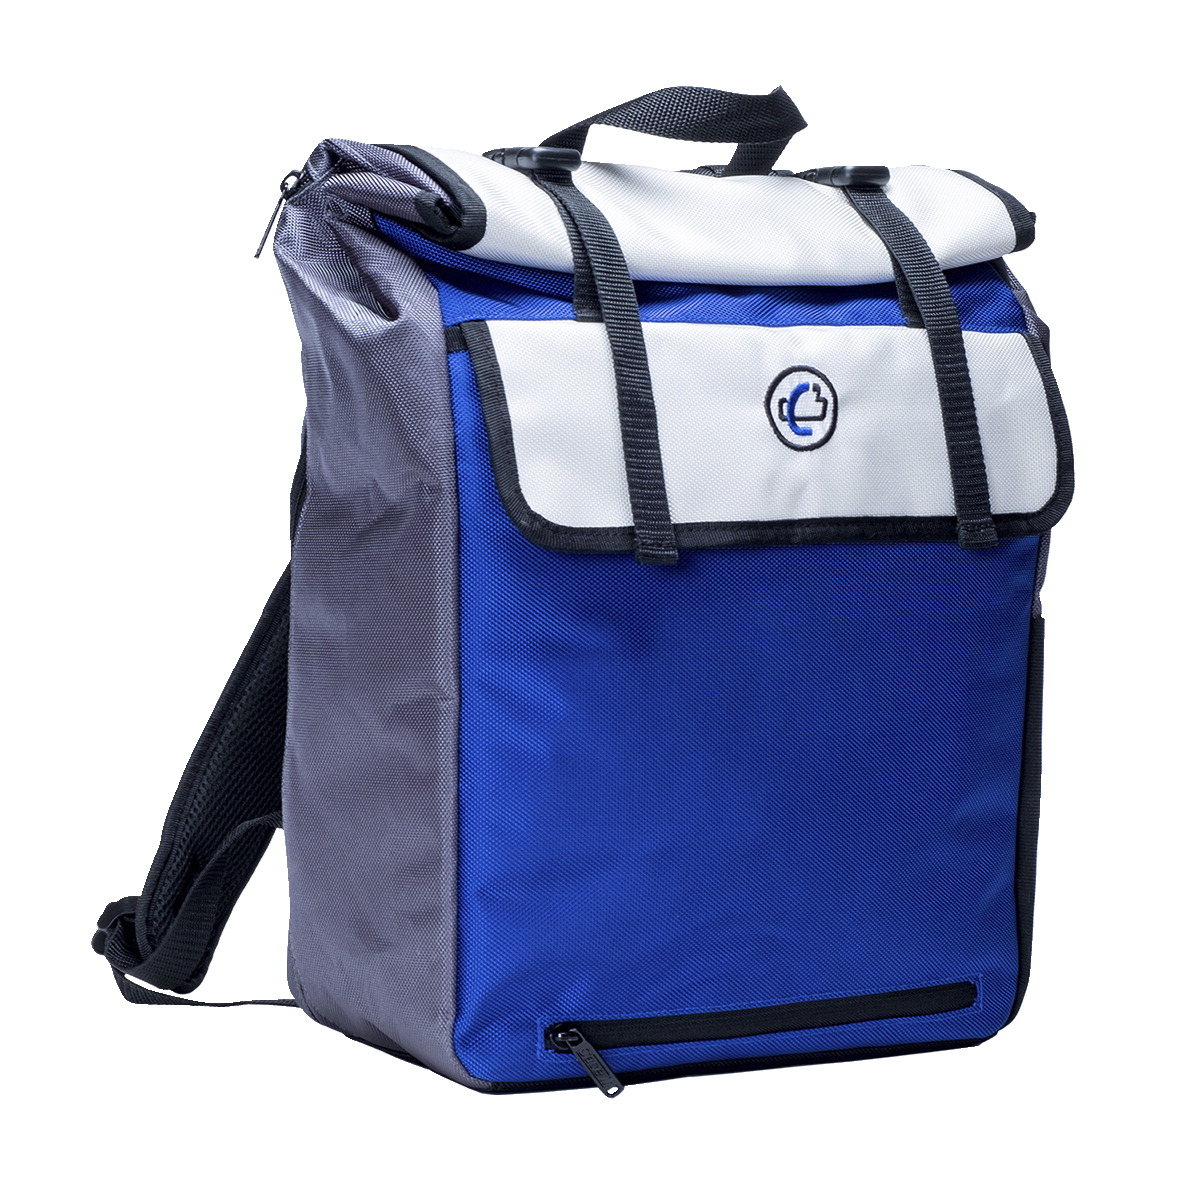 2004449 6 X 12.4 X 16.25 In. Rolltop Backpack, Blue With White Trim